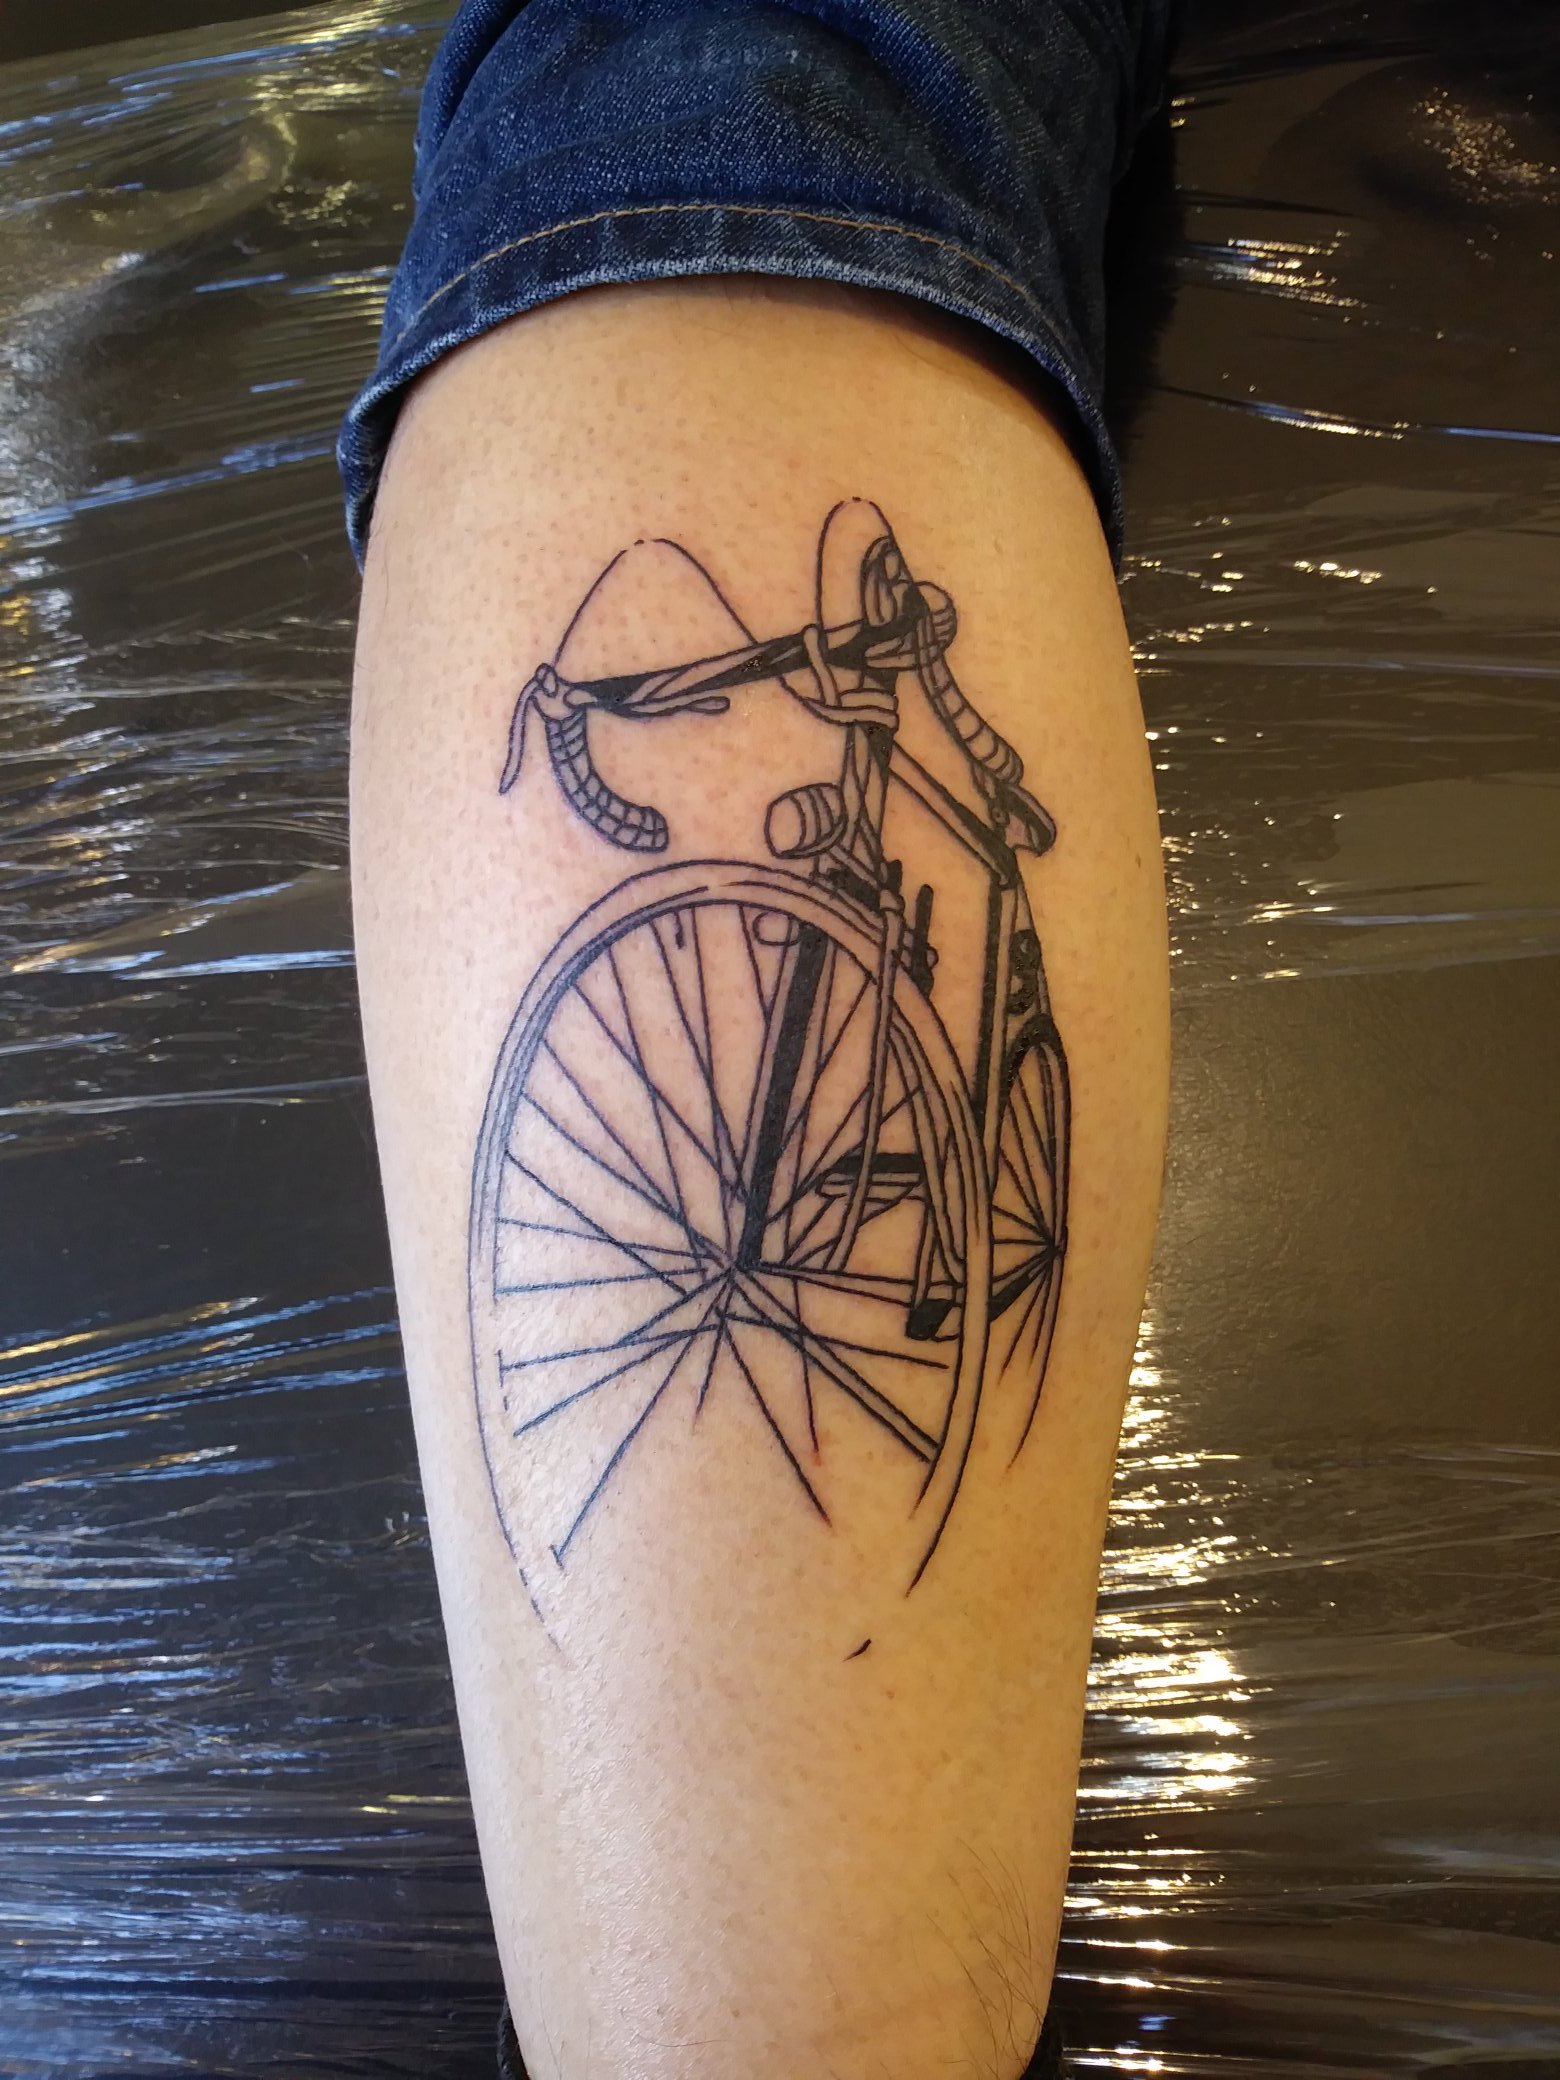 Cycling tattoos - WillCycle